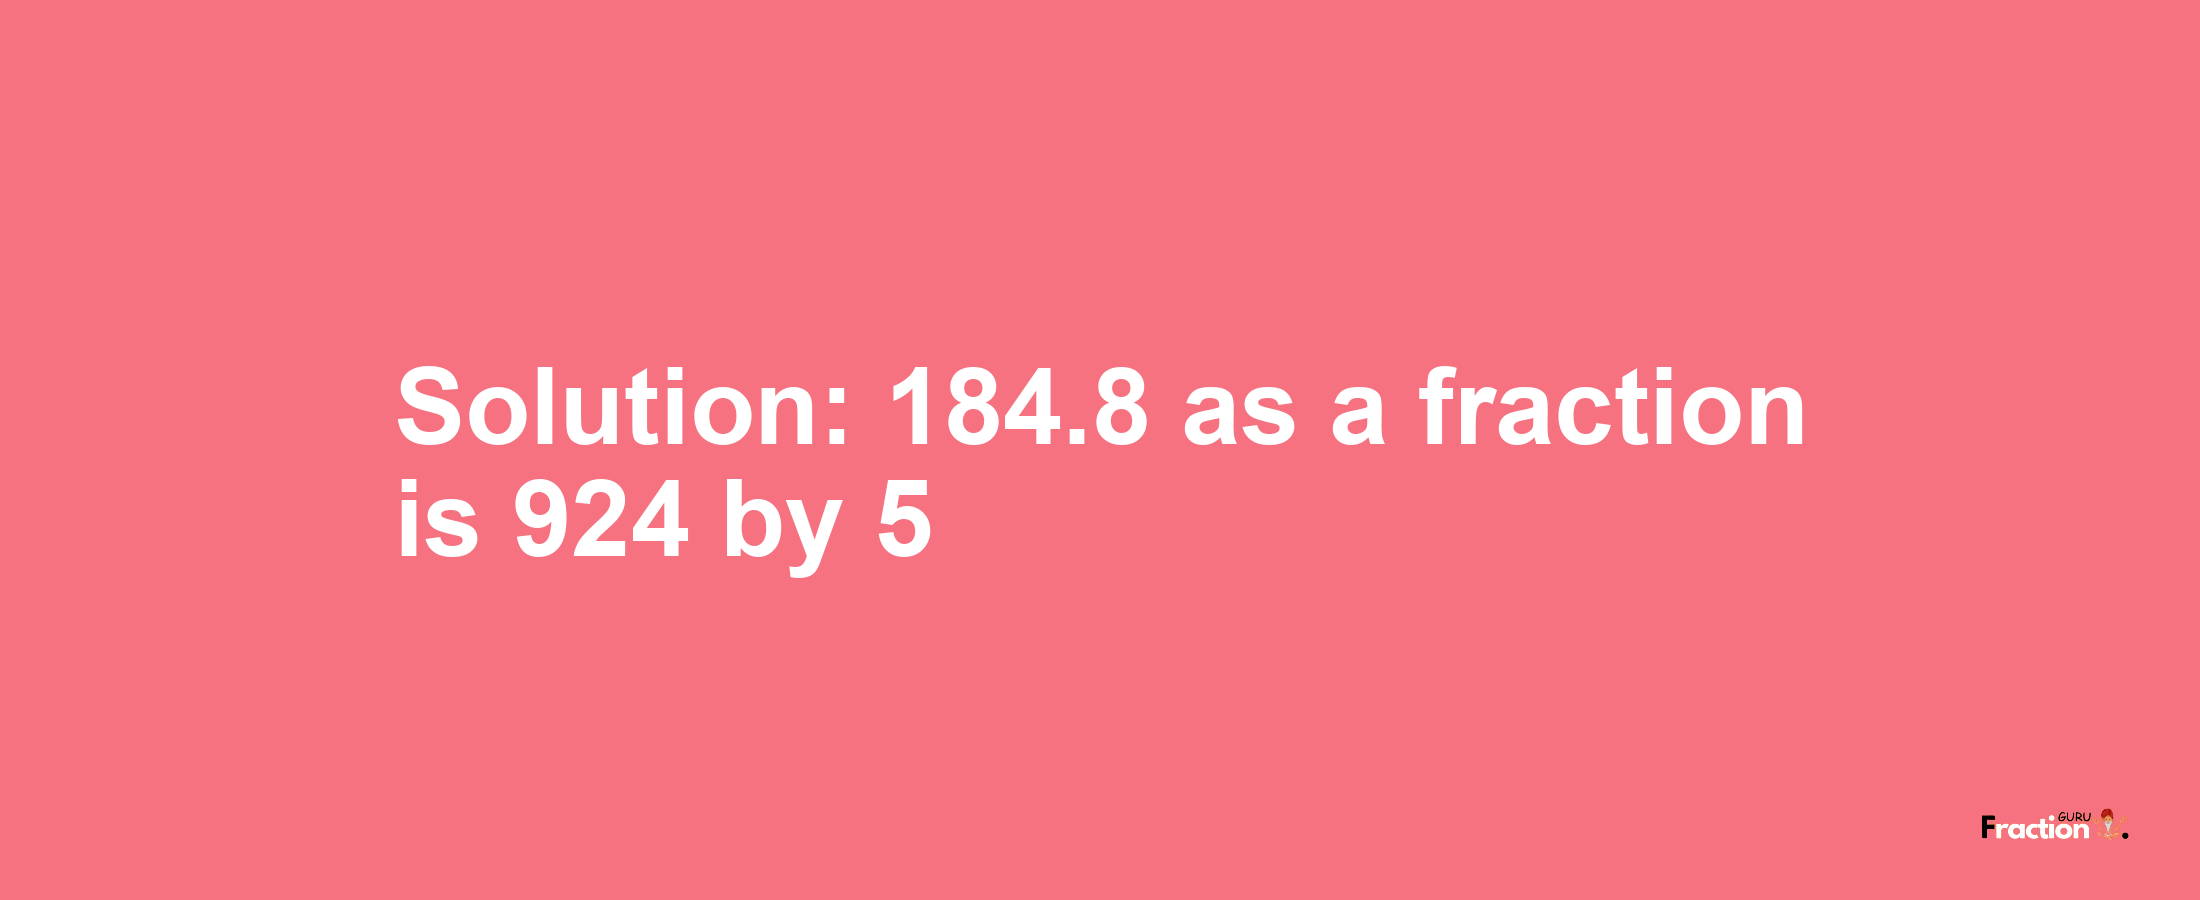 Solution:184.8 as a fraction is 924/5